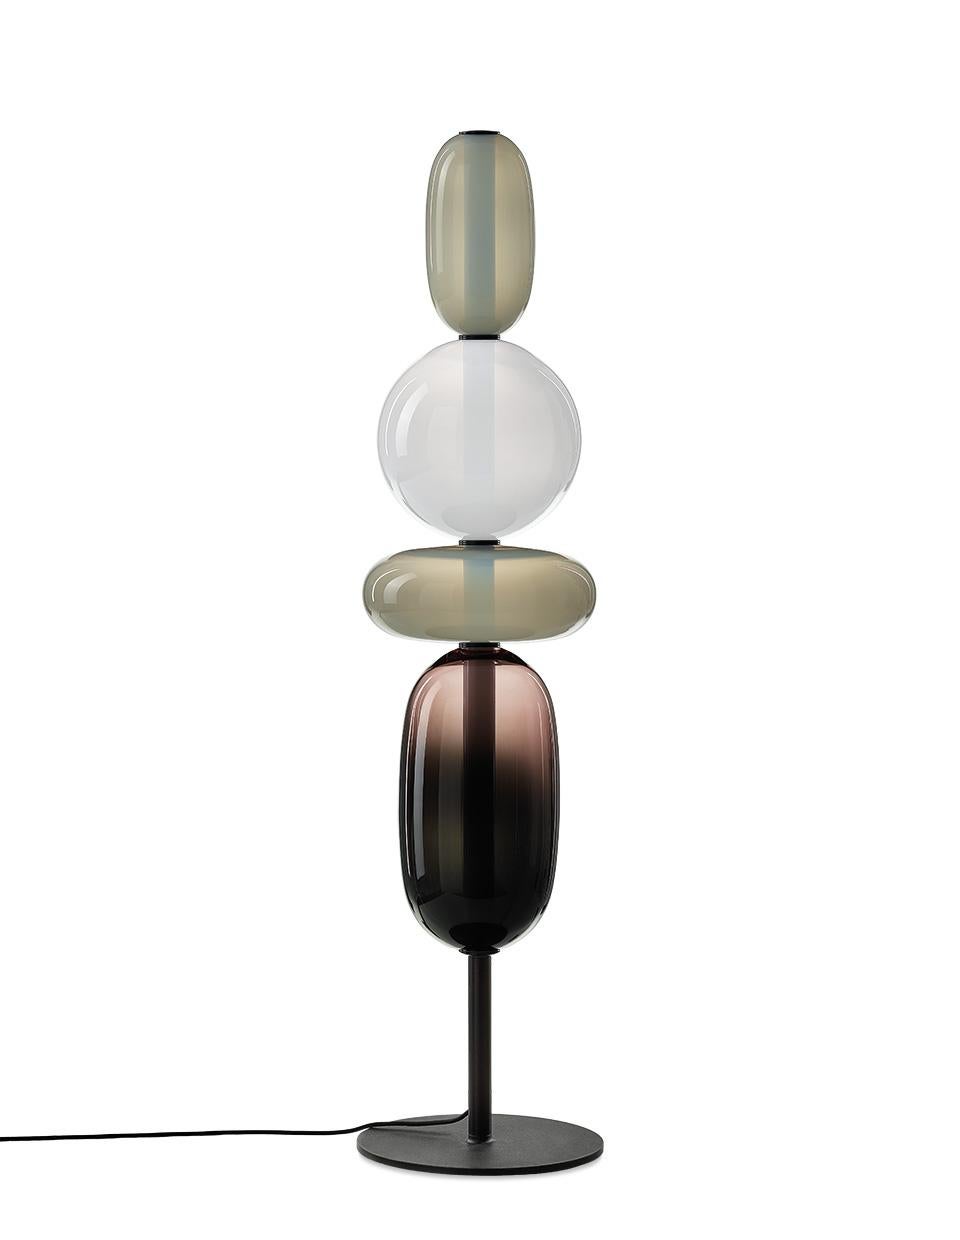 Contemporary Blown Crystal Glass Floor Lamp - Pebbles by Boris Klimek for Bomma

Pebbles are reminders of exceptional moments or favorite places. Their diverse shapes and colors inspired BOMMA’s playful collection that invites you to express your